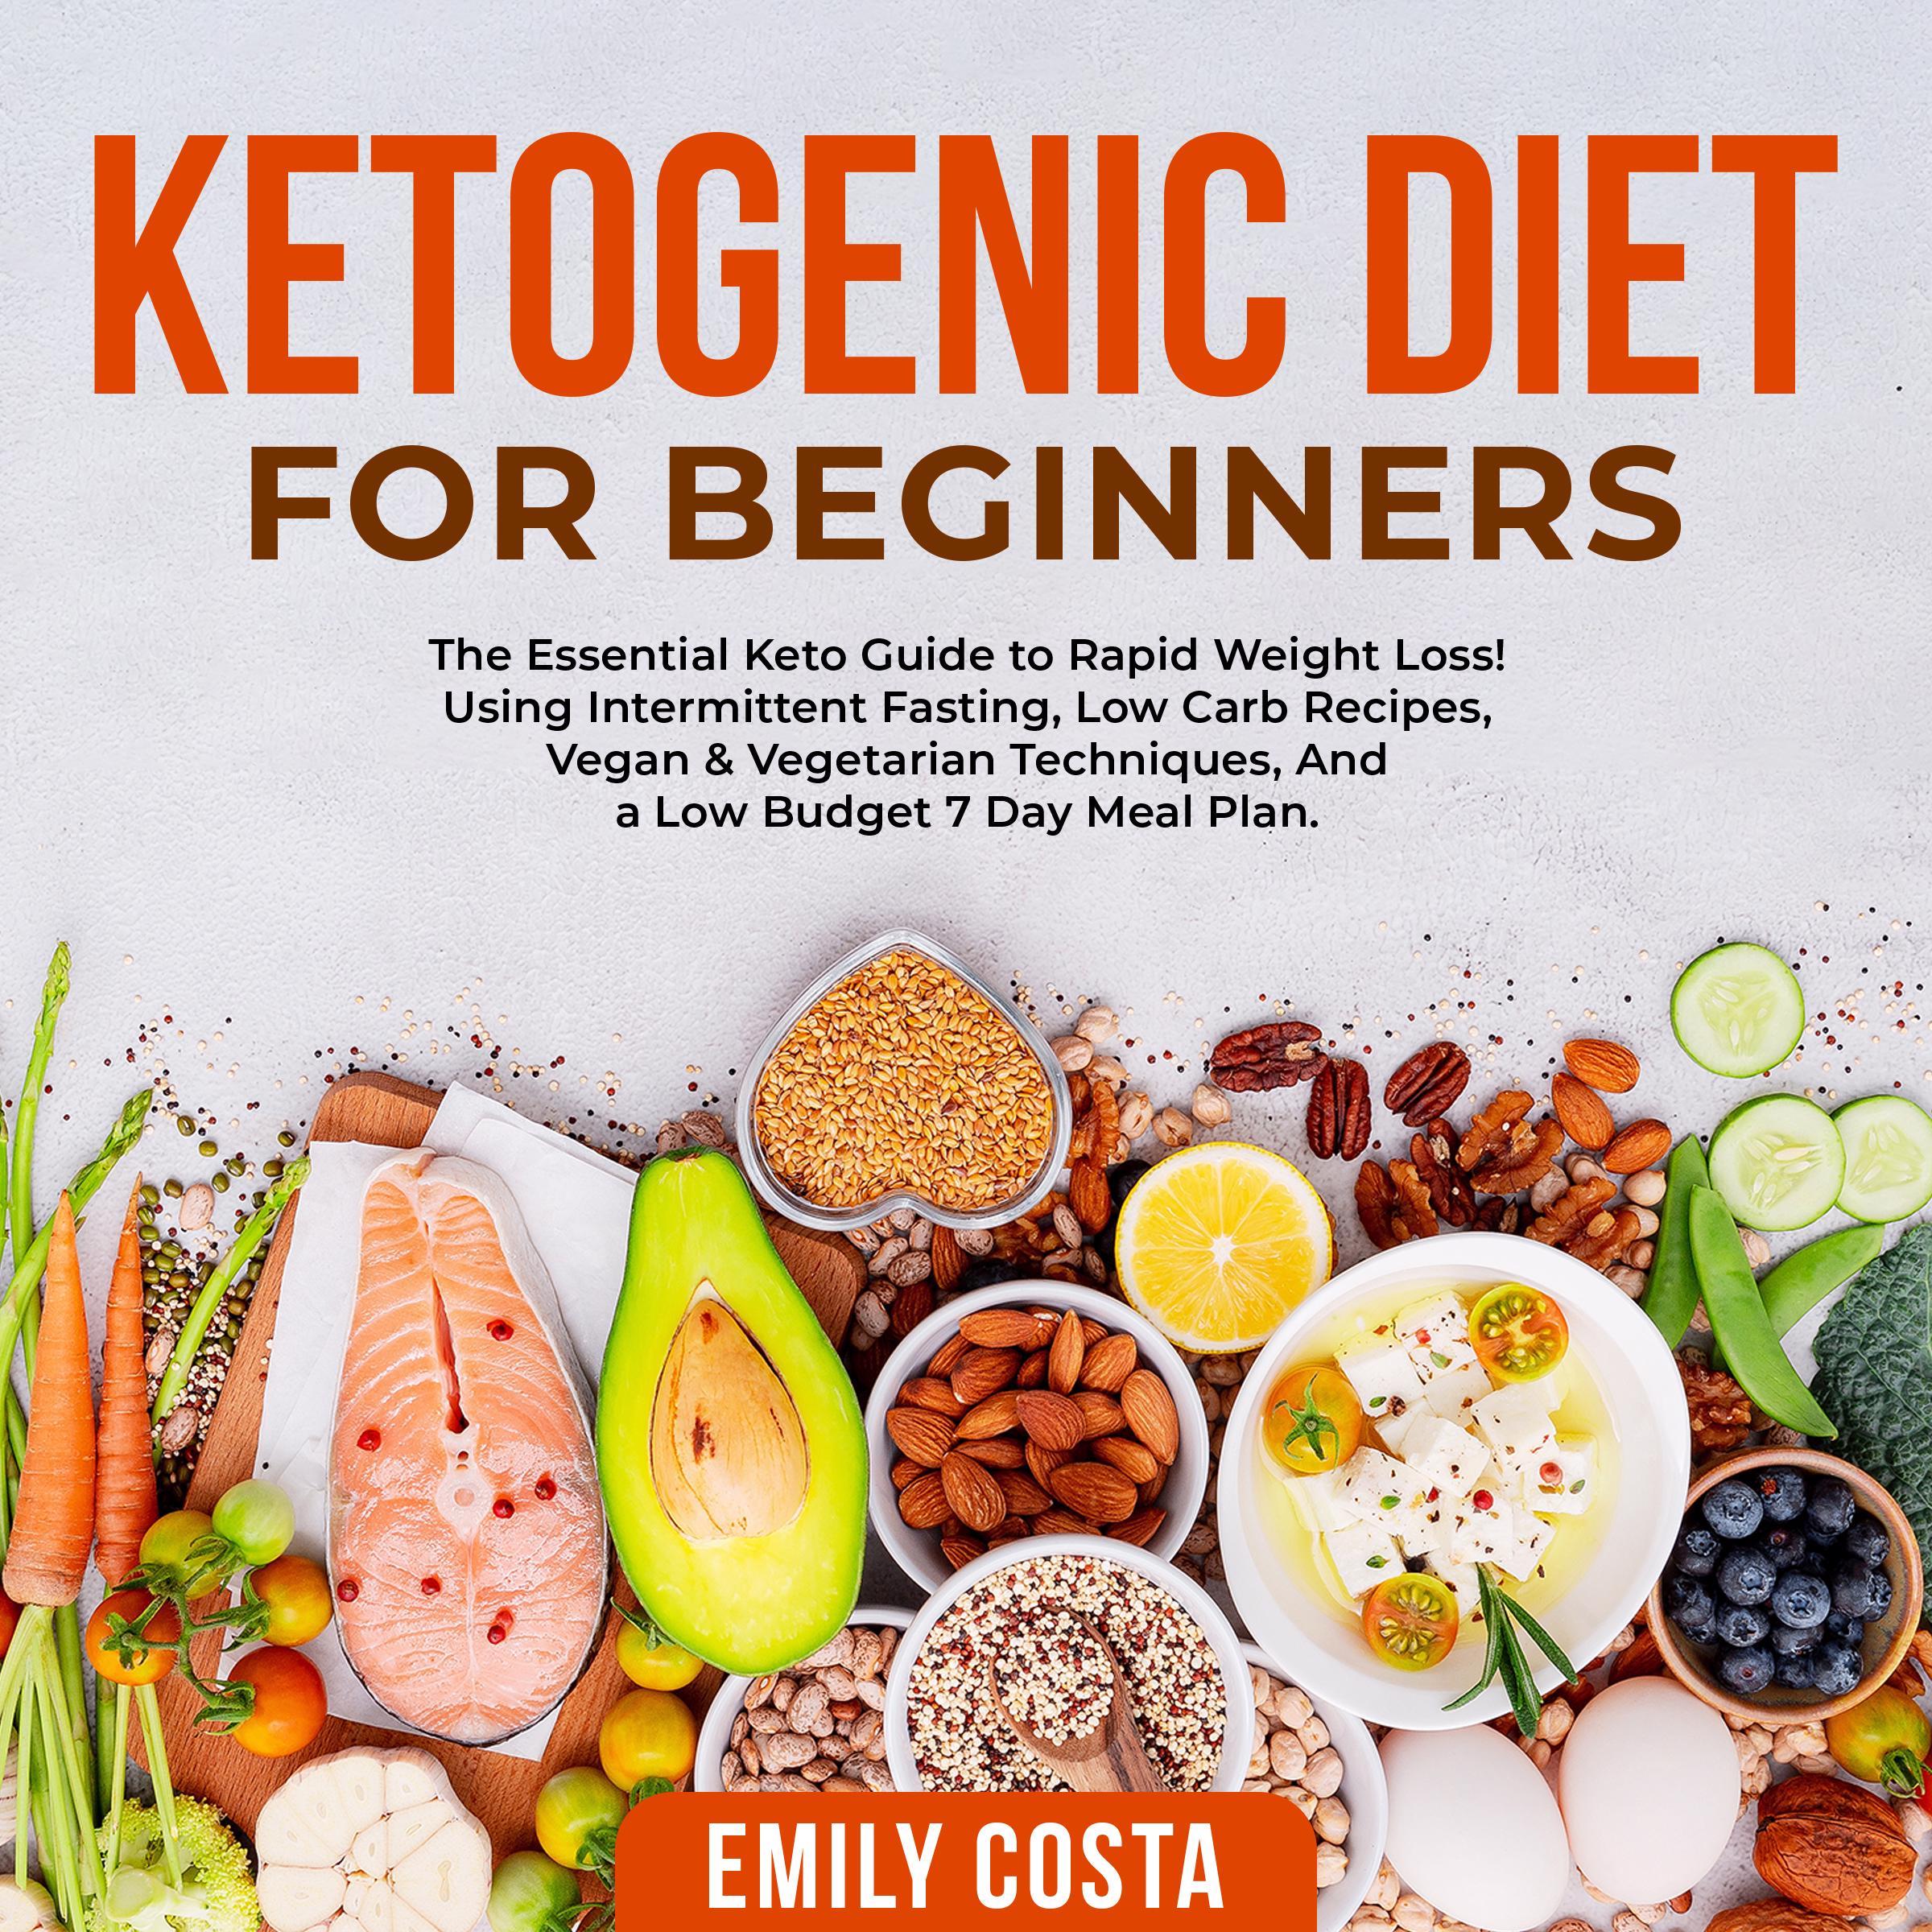 Ketogenic Diet for Beginners: The Essential Keto Guide to Rapid Weight Loss! Using Intermittent Fasting, Low Carb Recipes, Vegan & Vegetarian Techniques, And a Low Budget 7 Day Meal Plan.